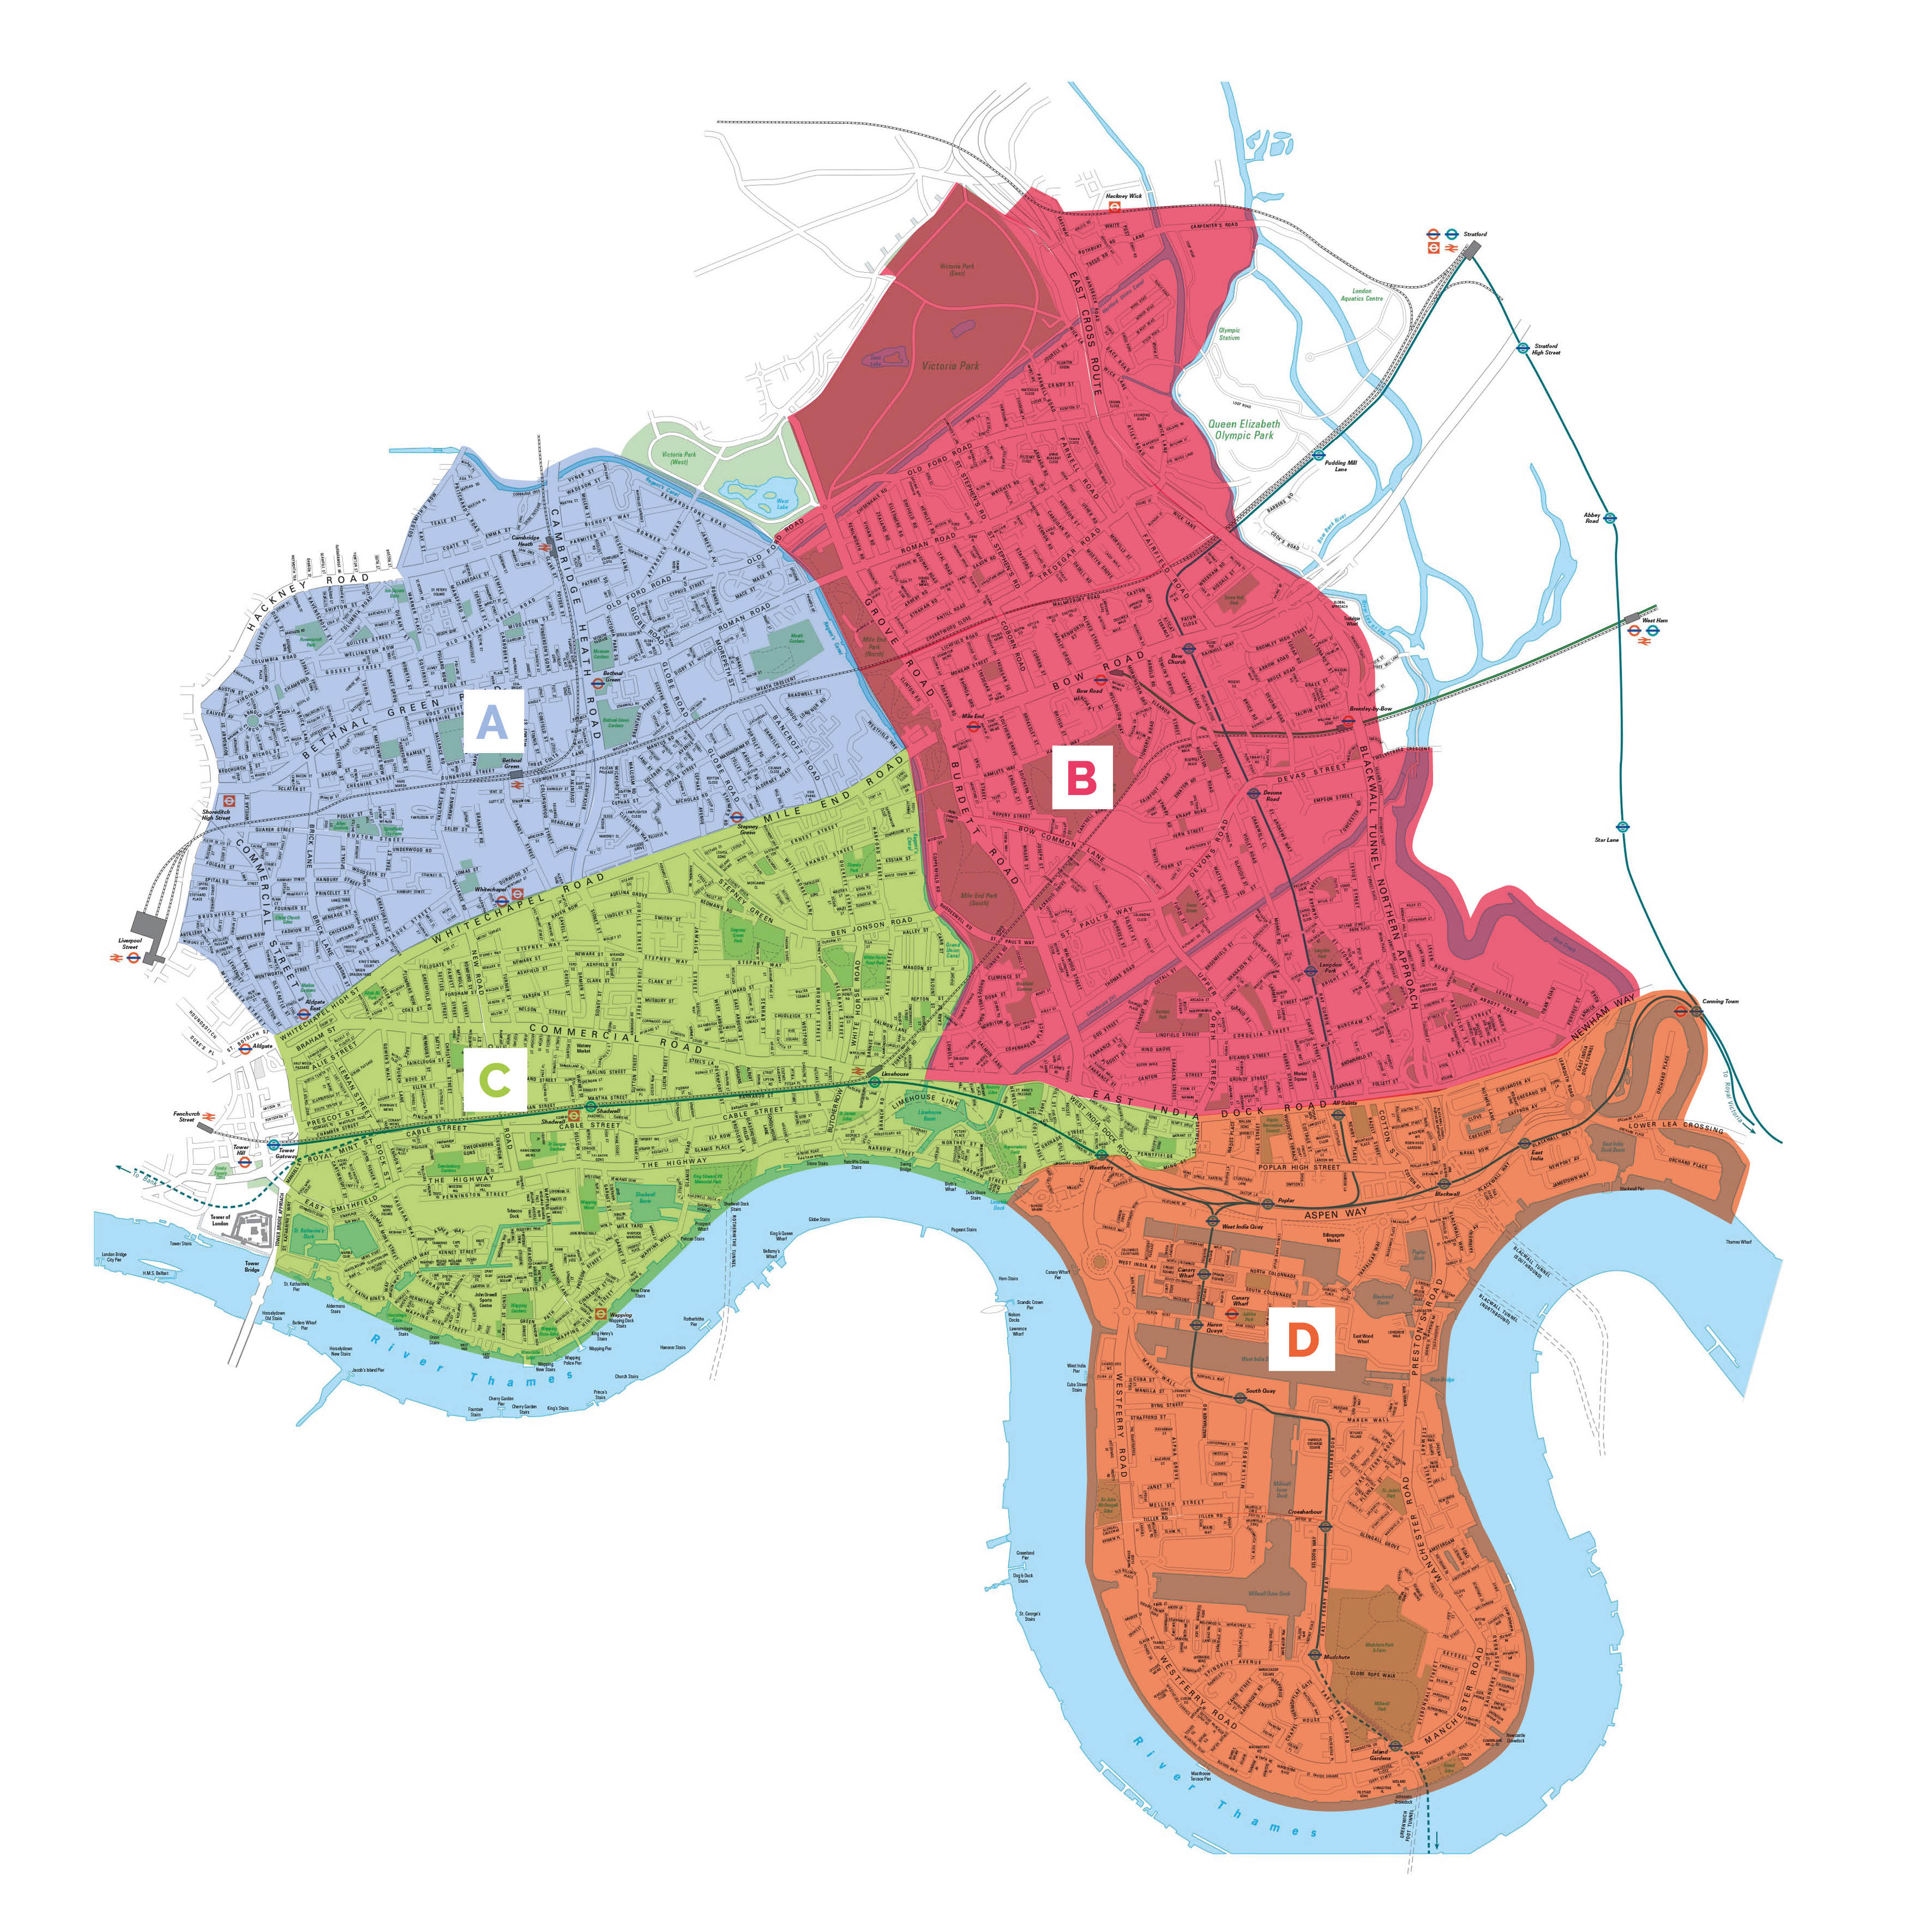 The map shows the four areas, marked as A (covering areas around Bethnal Green), B (covering areas around Bow), C (covering areas around Shadwell and Stepney) and D (covering around around Poplar and Crossharbour).